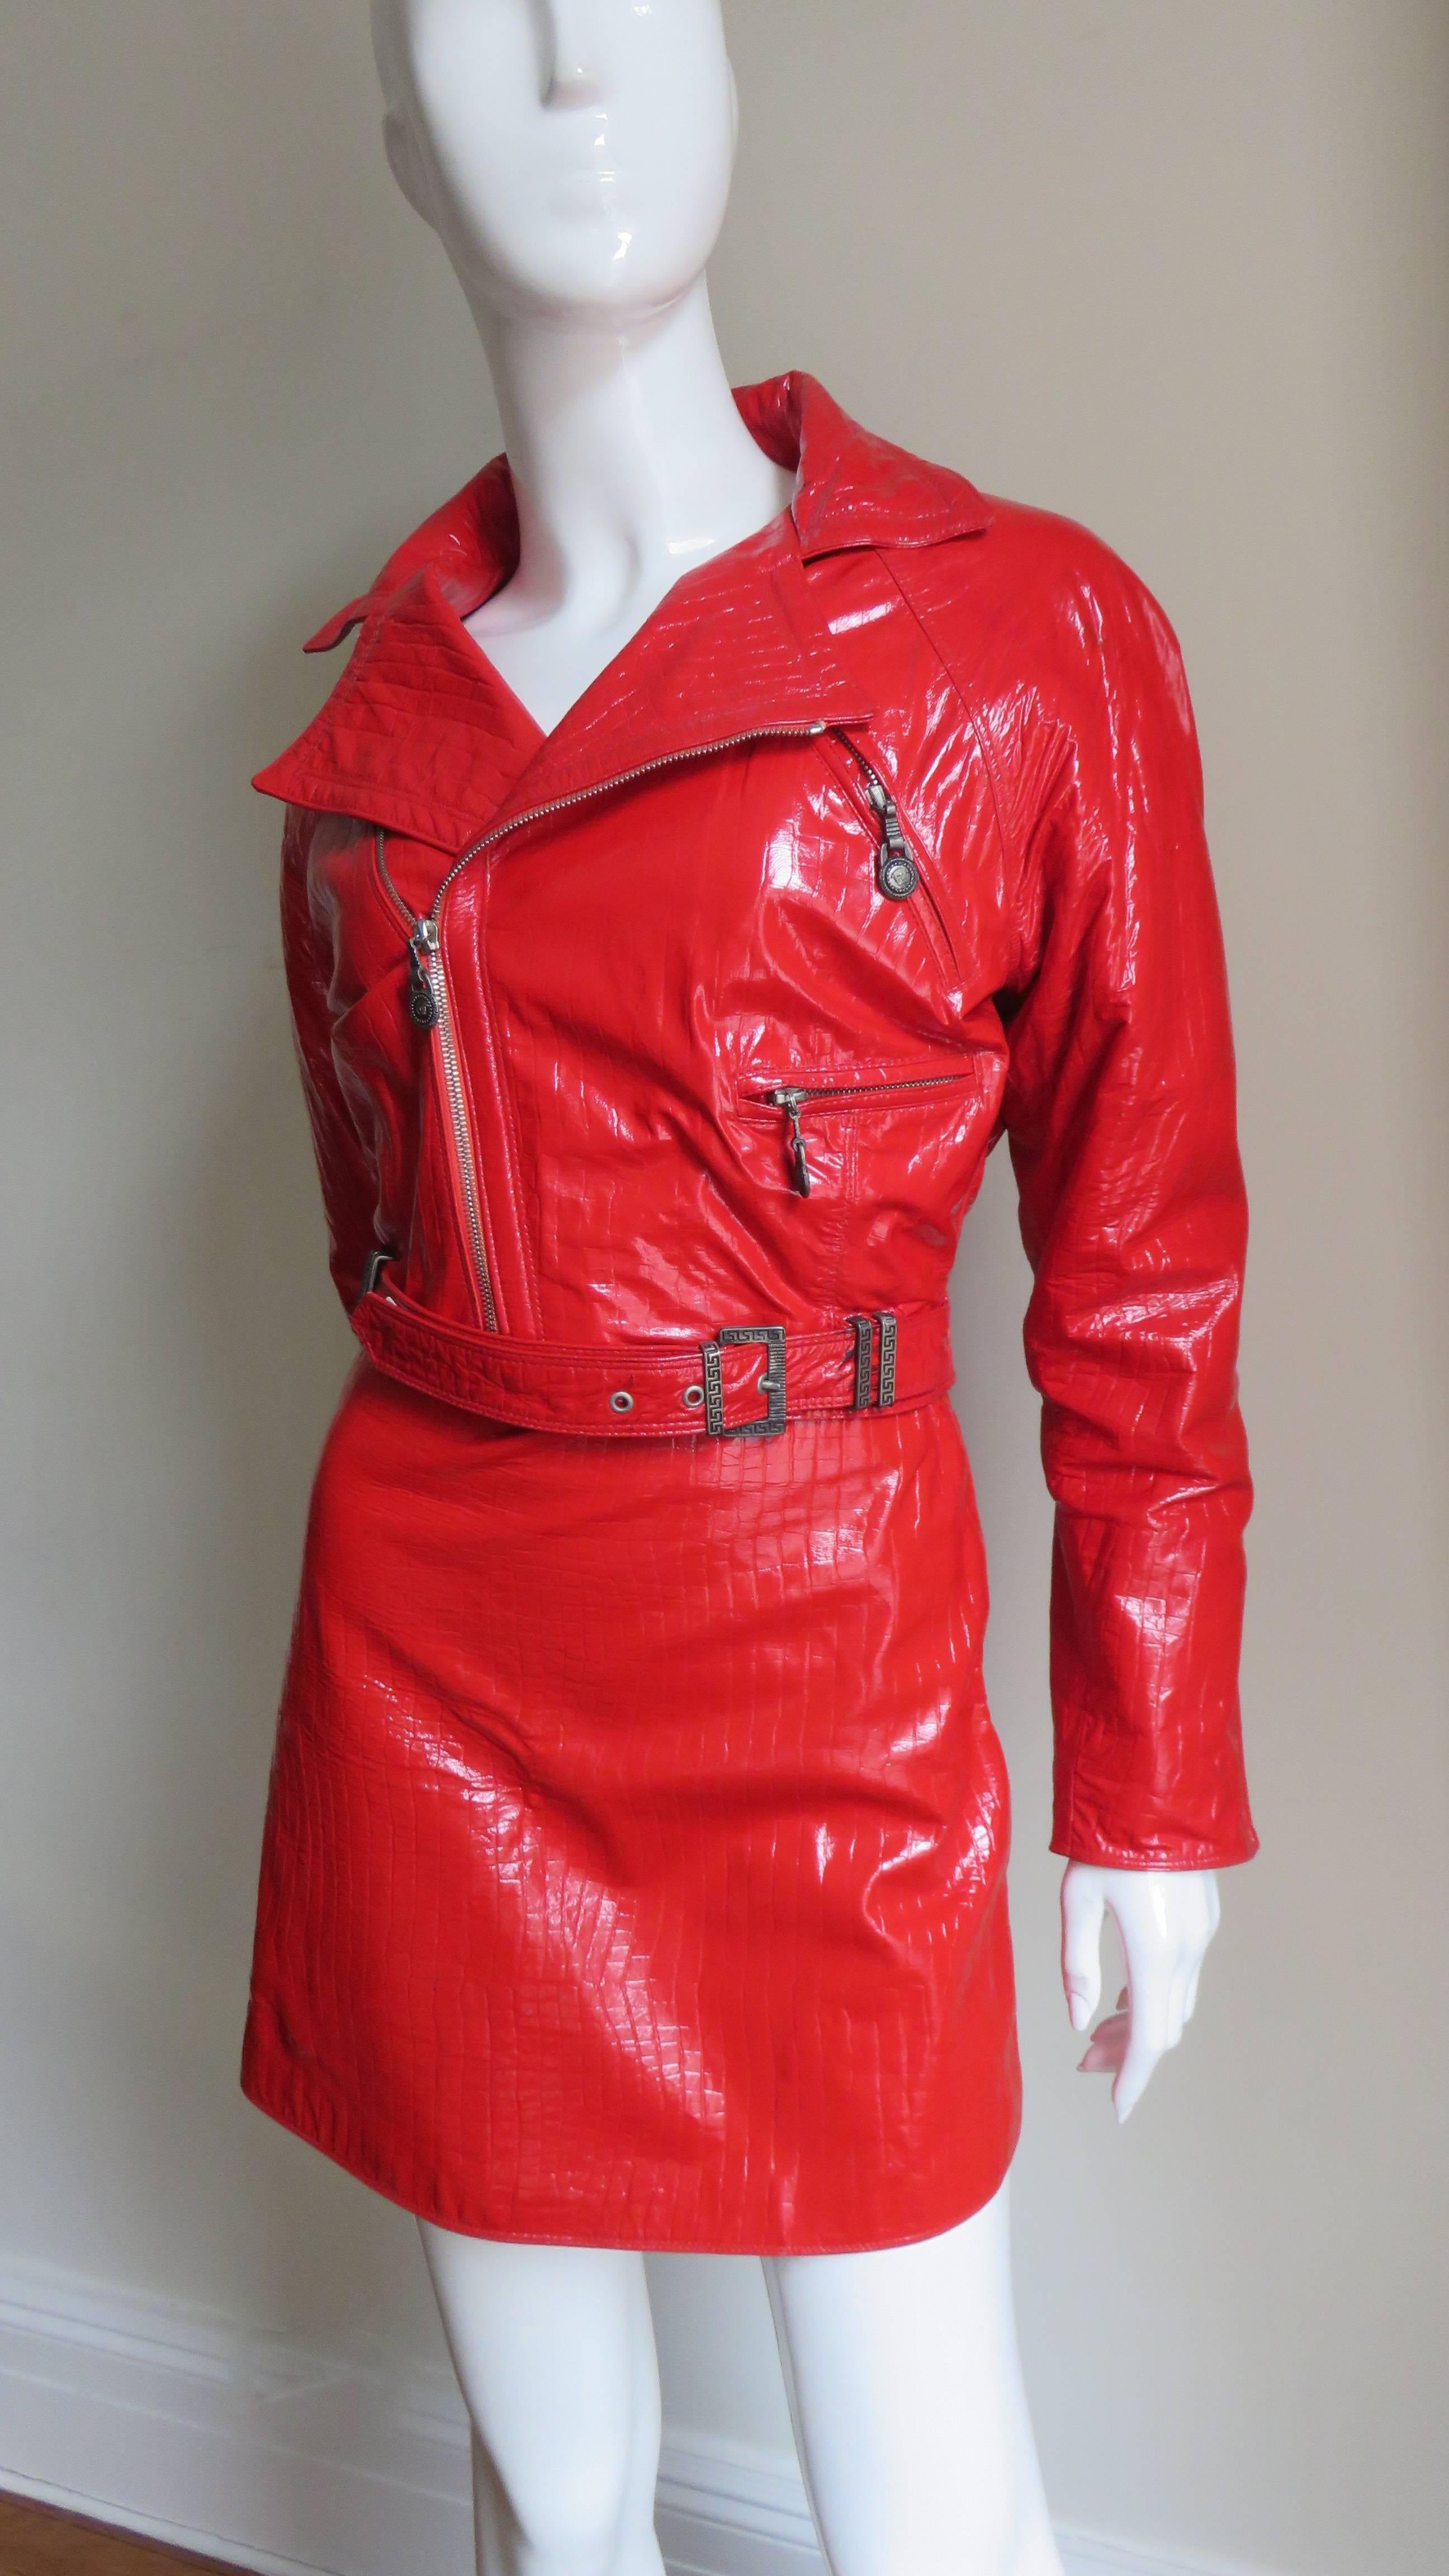 Women's Gianni Versace Red Leather Motorcycle Jacket and Skirt A/W 1994 For Sale